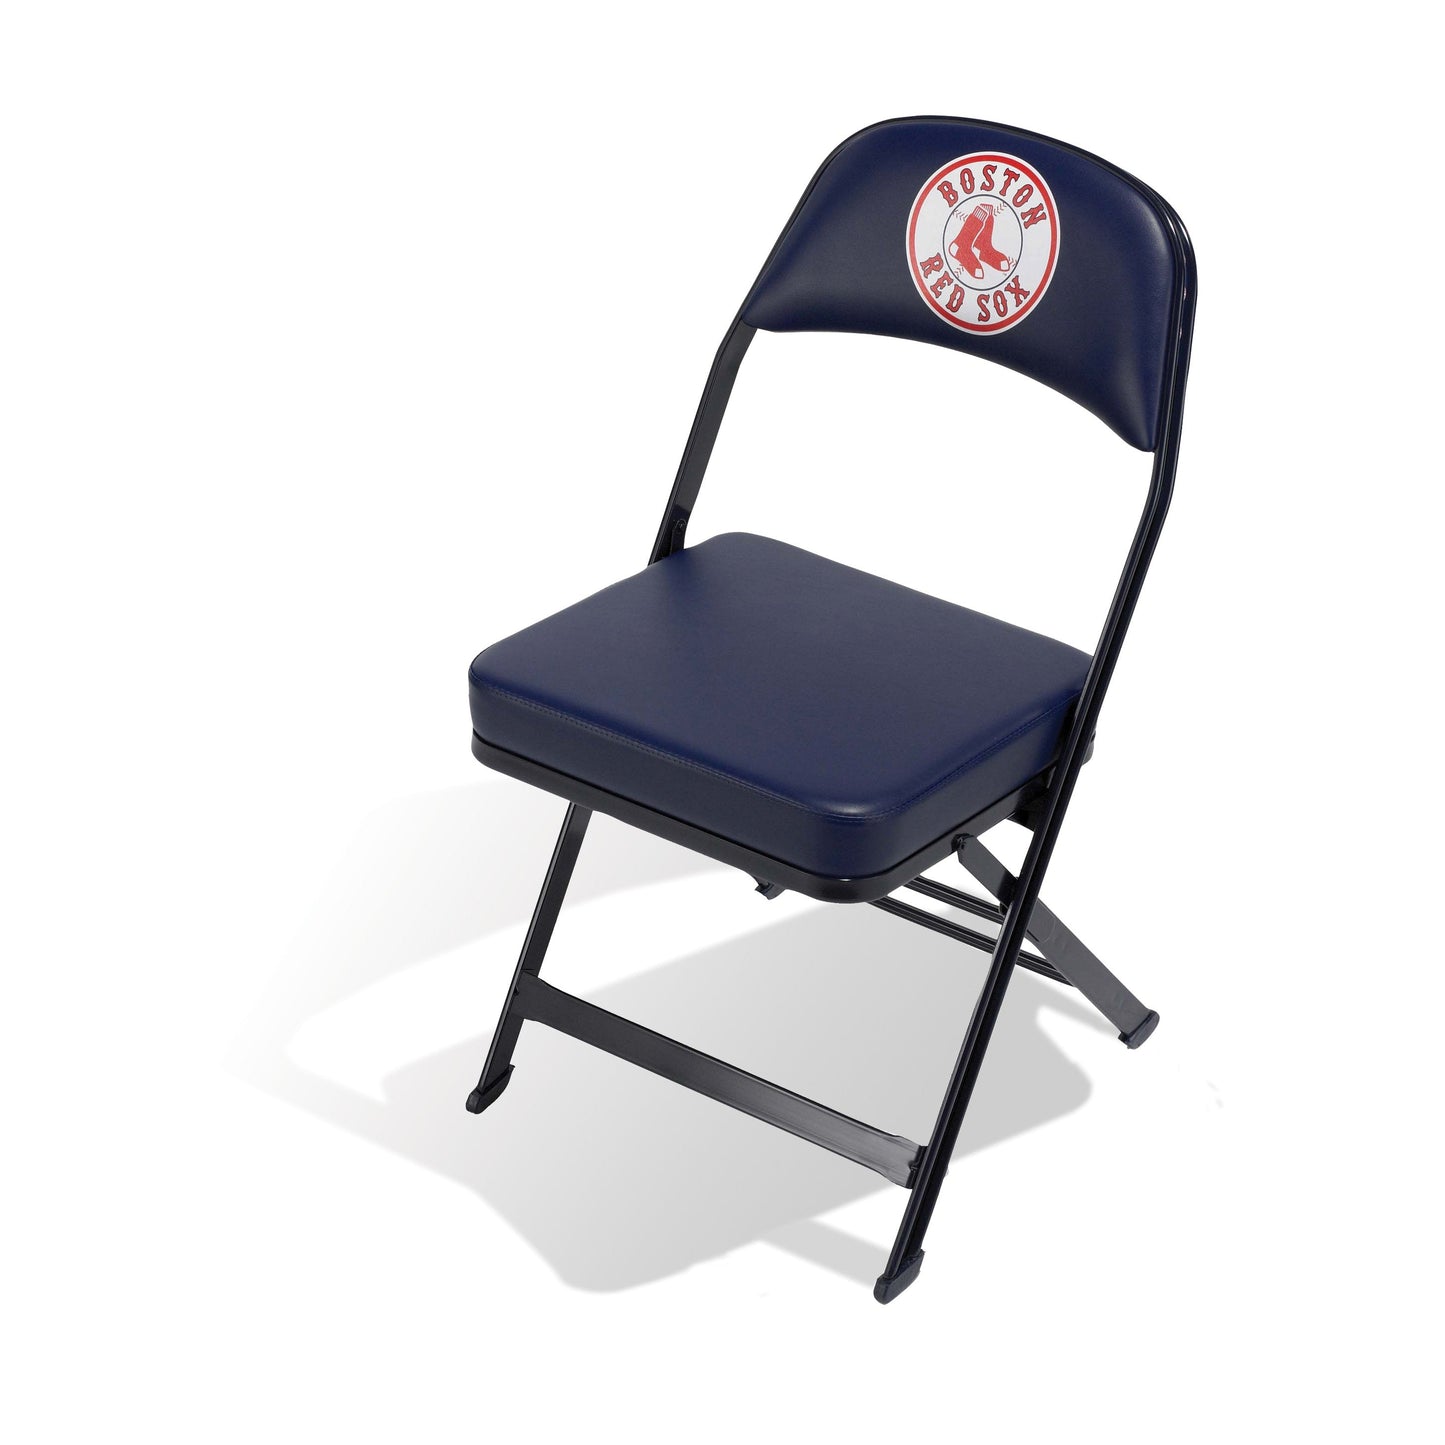 DS 100 Sideline Chair